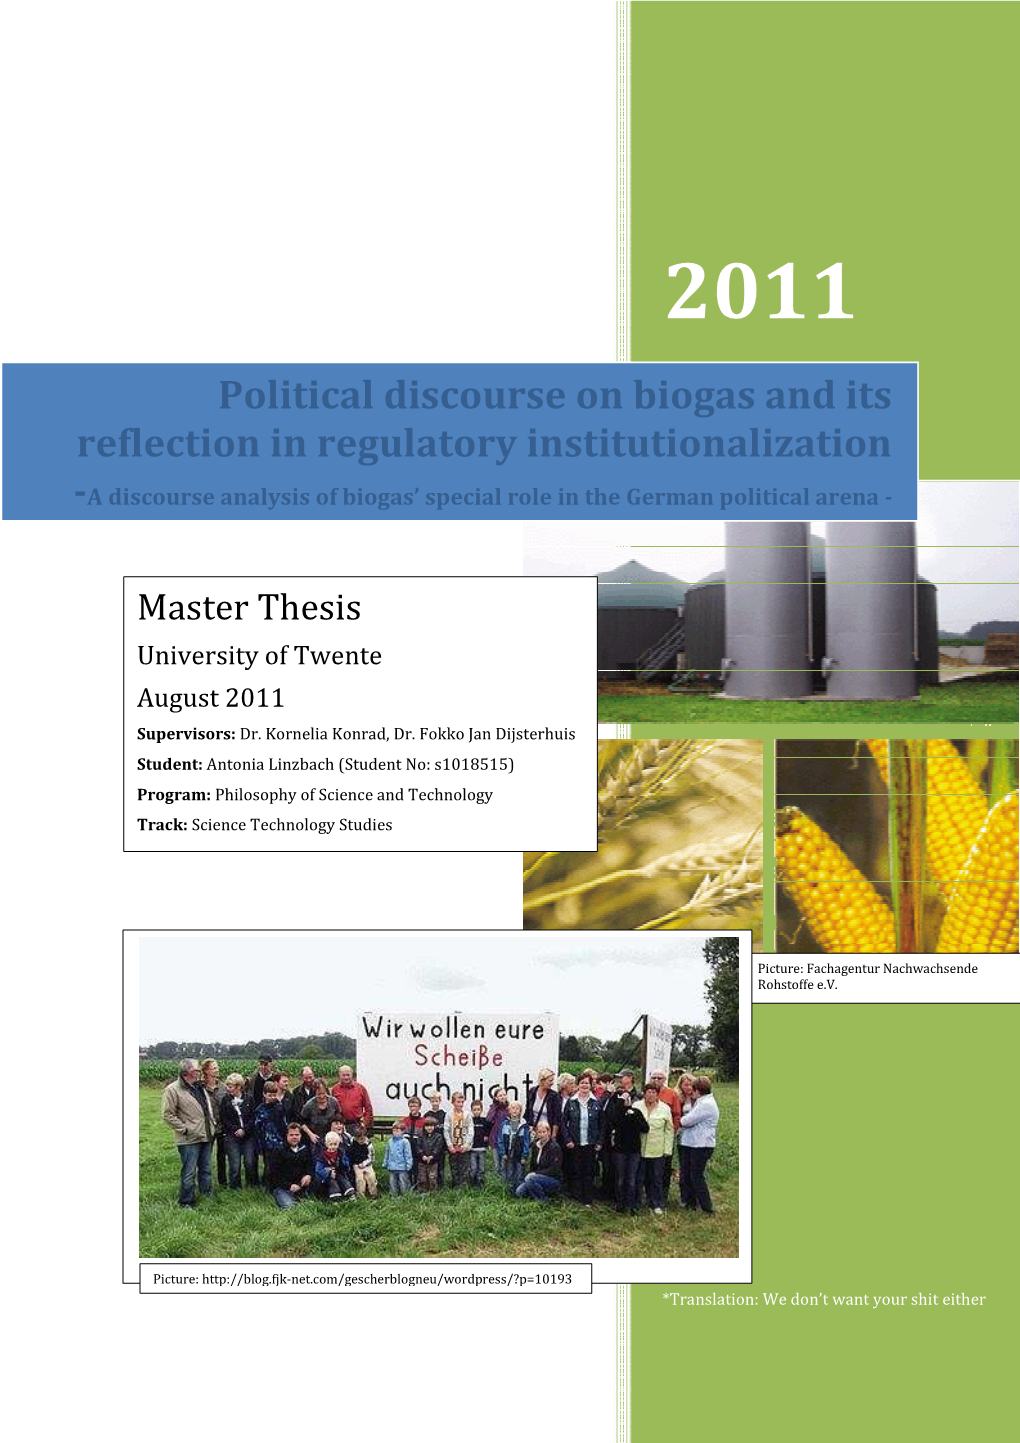 Political Discourse on Biogas and Its Reflection in Regulatory Institutionalization -A Discourse Analysis of Biogas’ Special Role in the German Political Arena